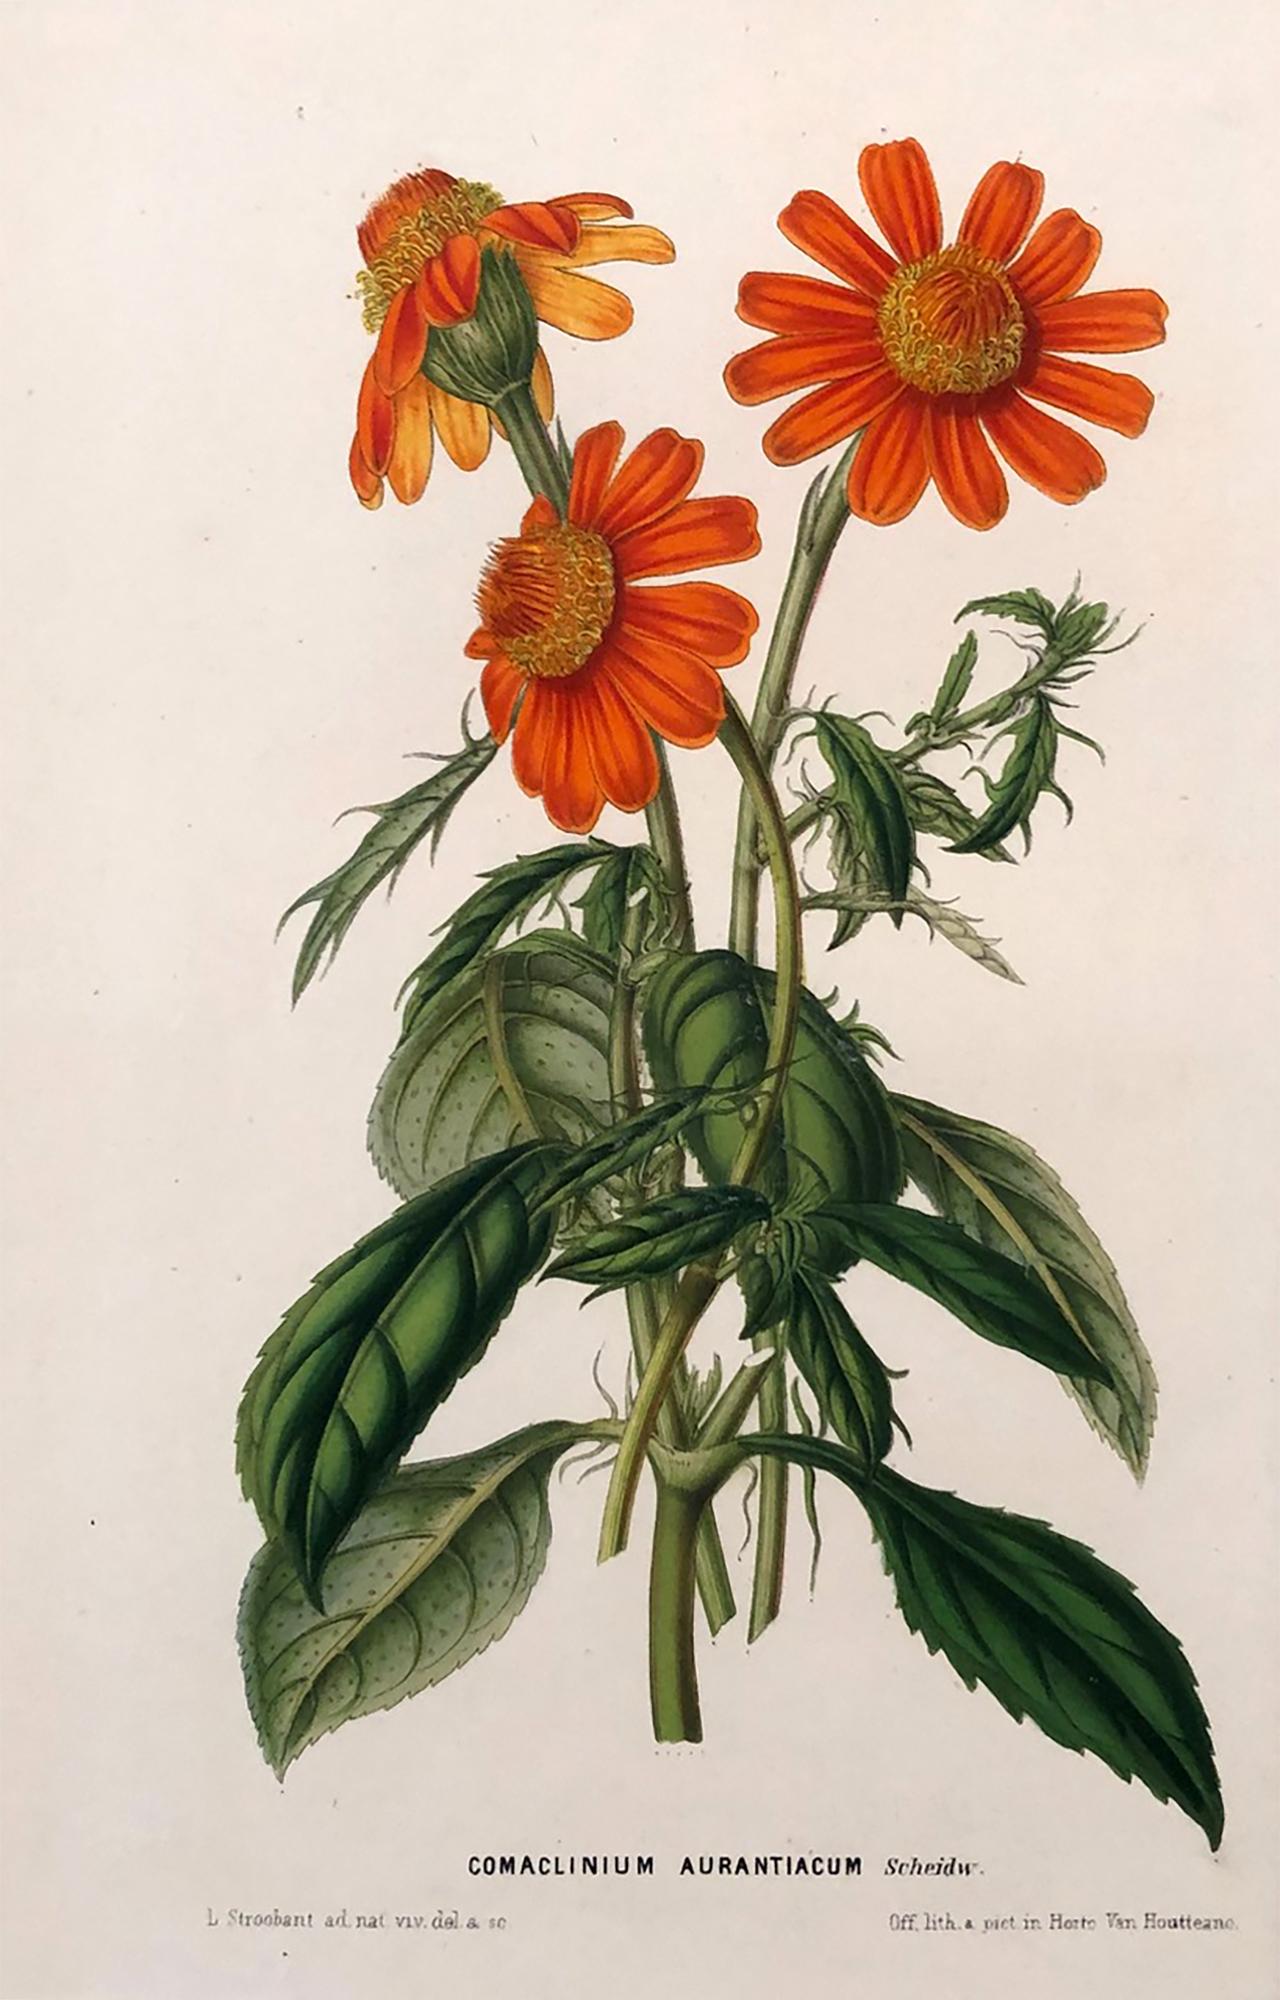 This set of nine beautiful hand finished chromolithographs was published, circa 1850 by Louis Van Houtte in ”Flore des serves et des Jardin deL’Europe“. These fine vibrant engravings are highly sought after and quite rare. Van Houtte founded the